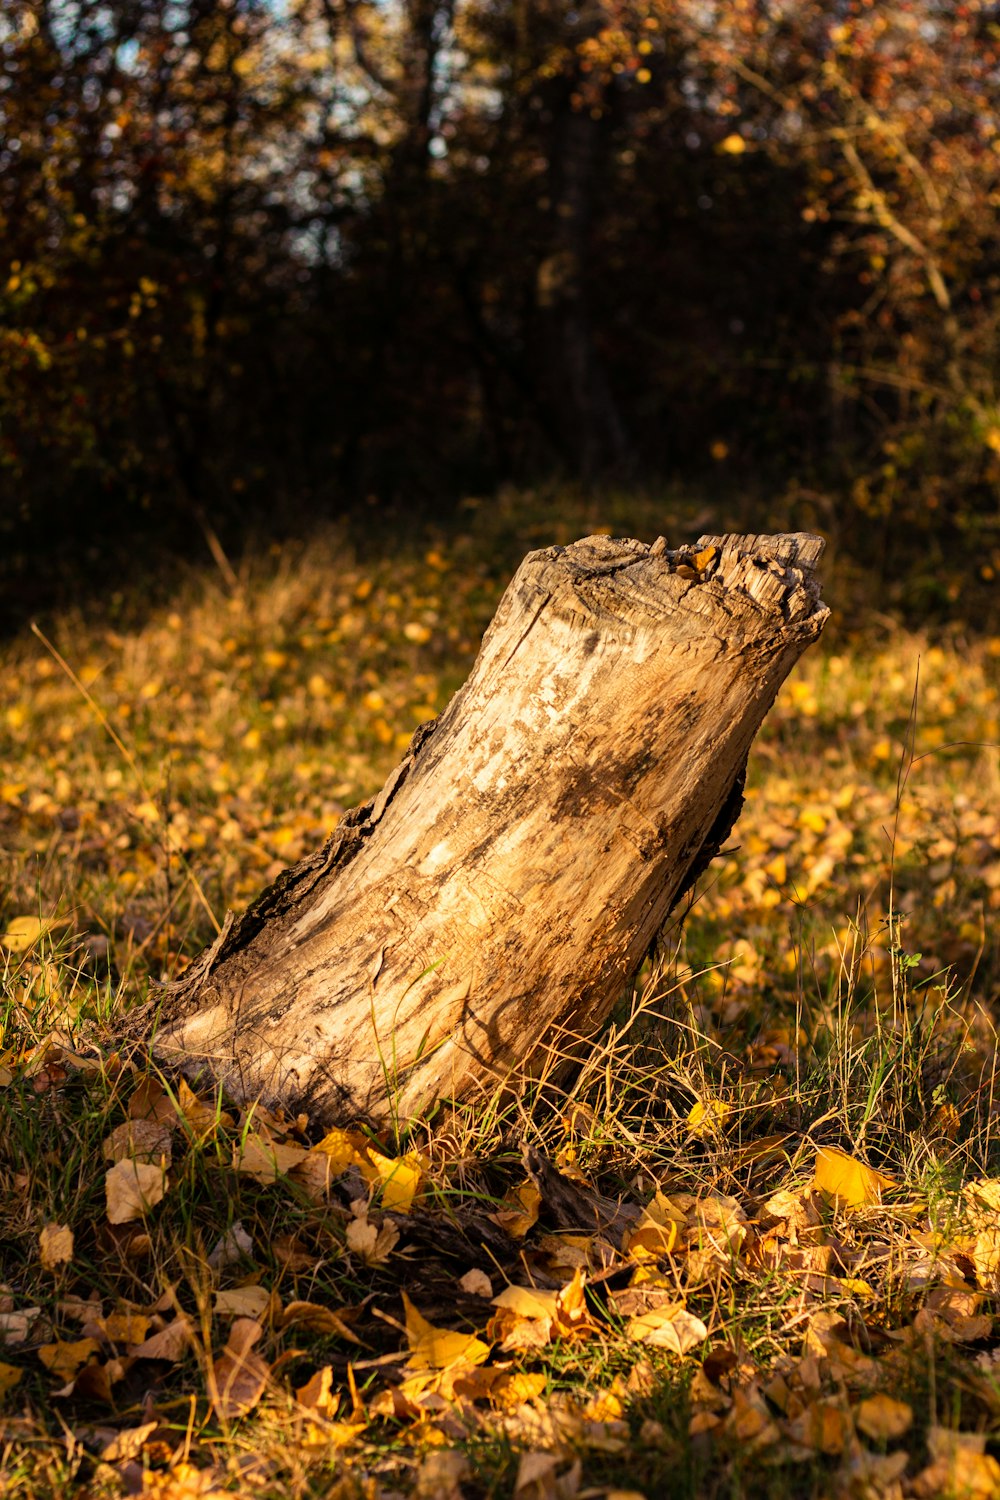 a tree stump in the middle of a field of leaves